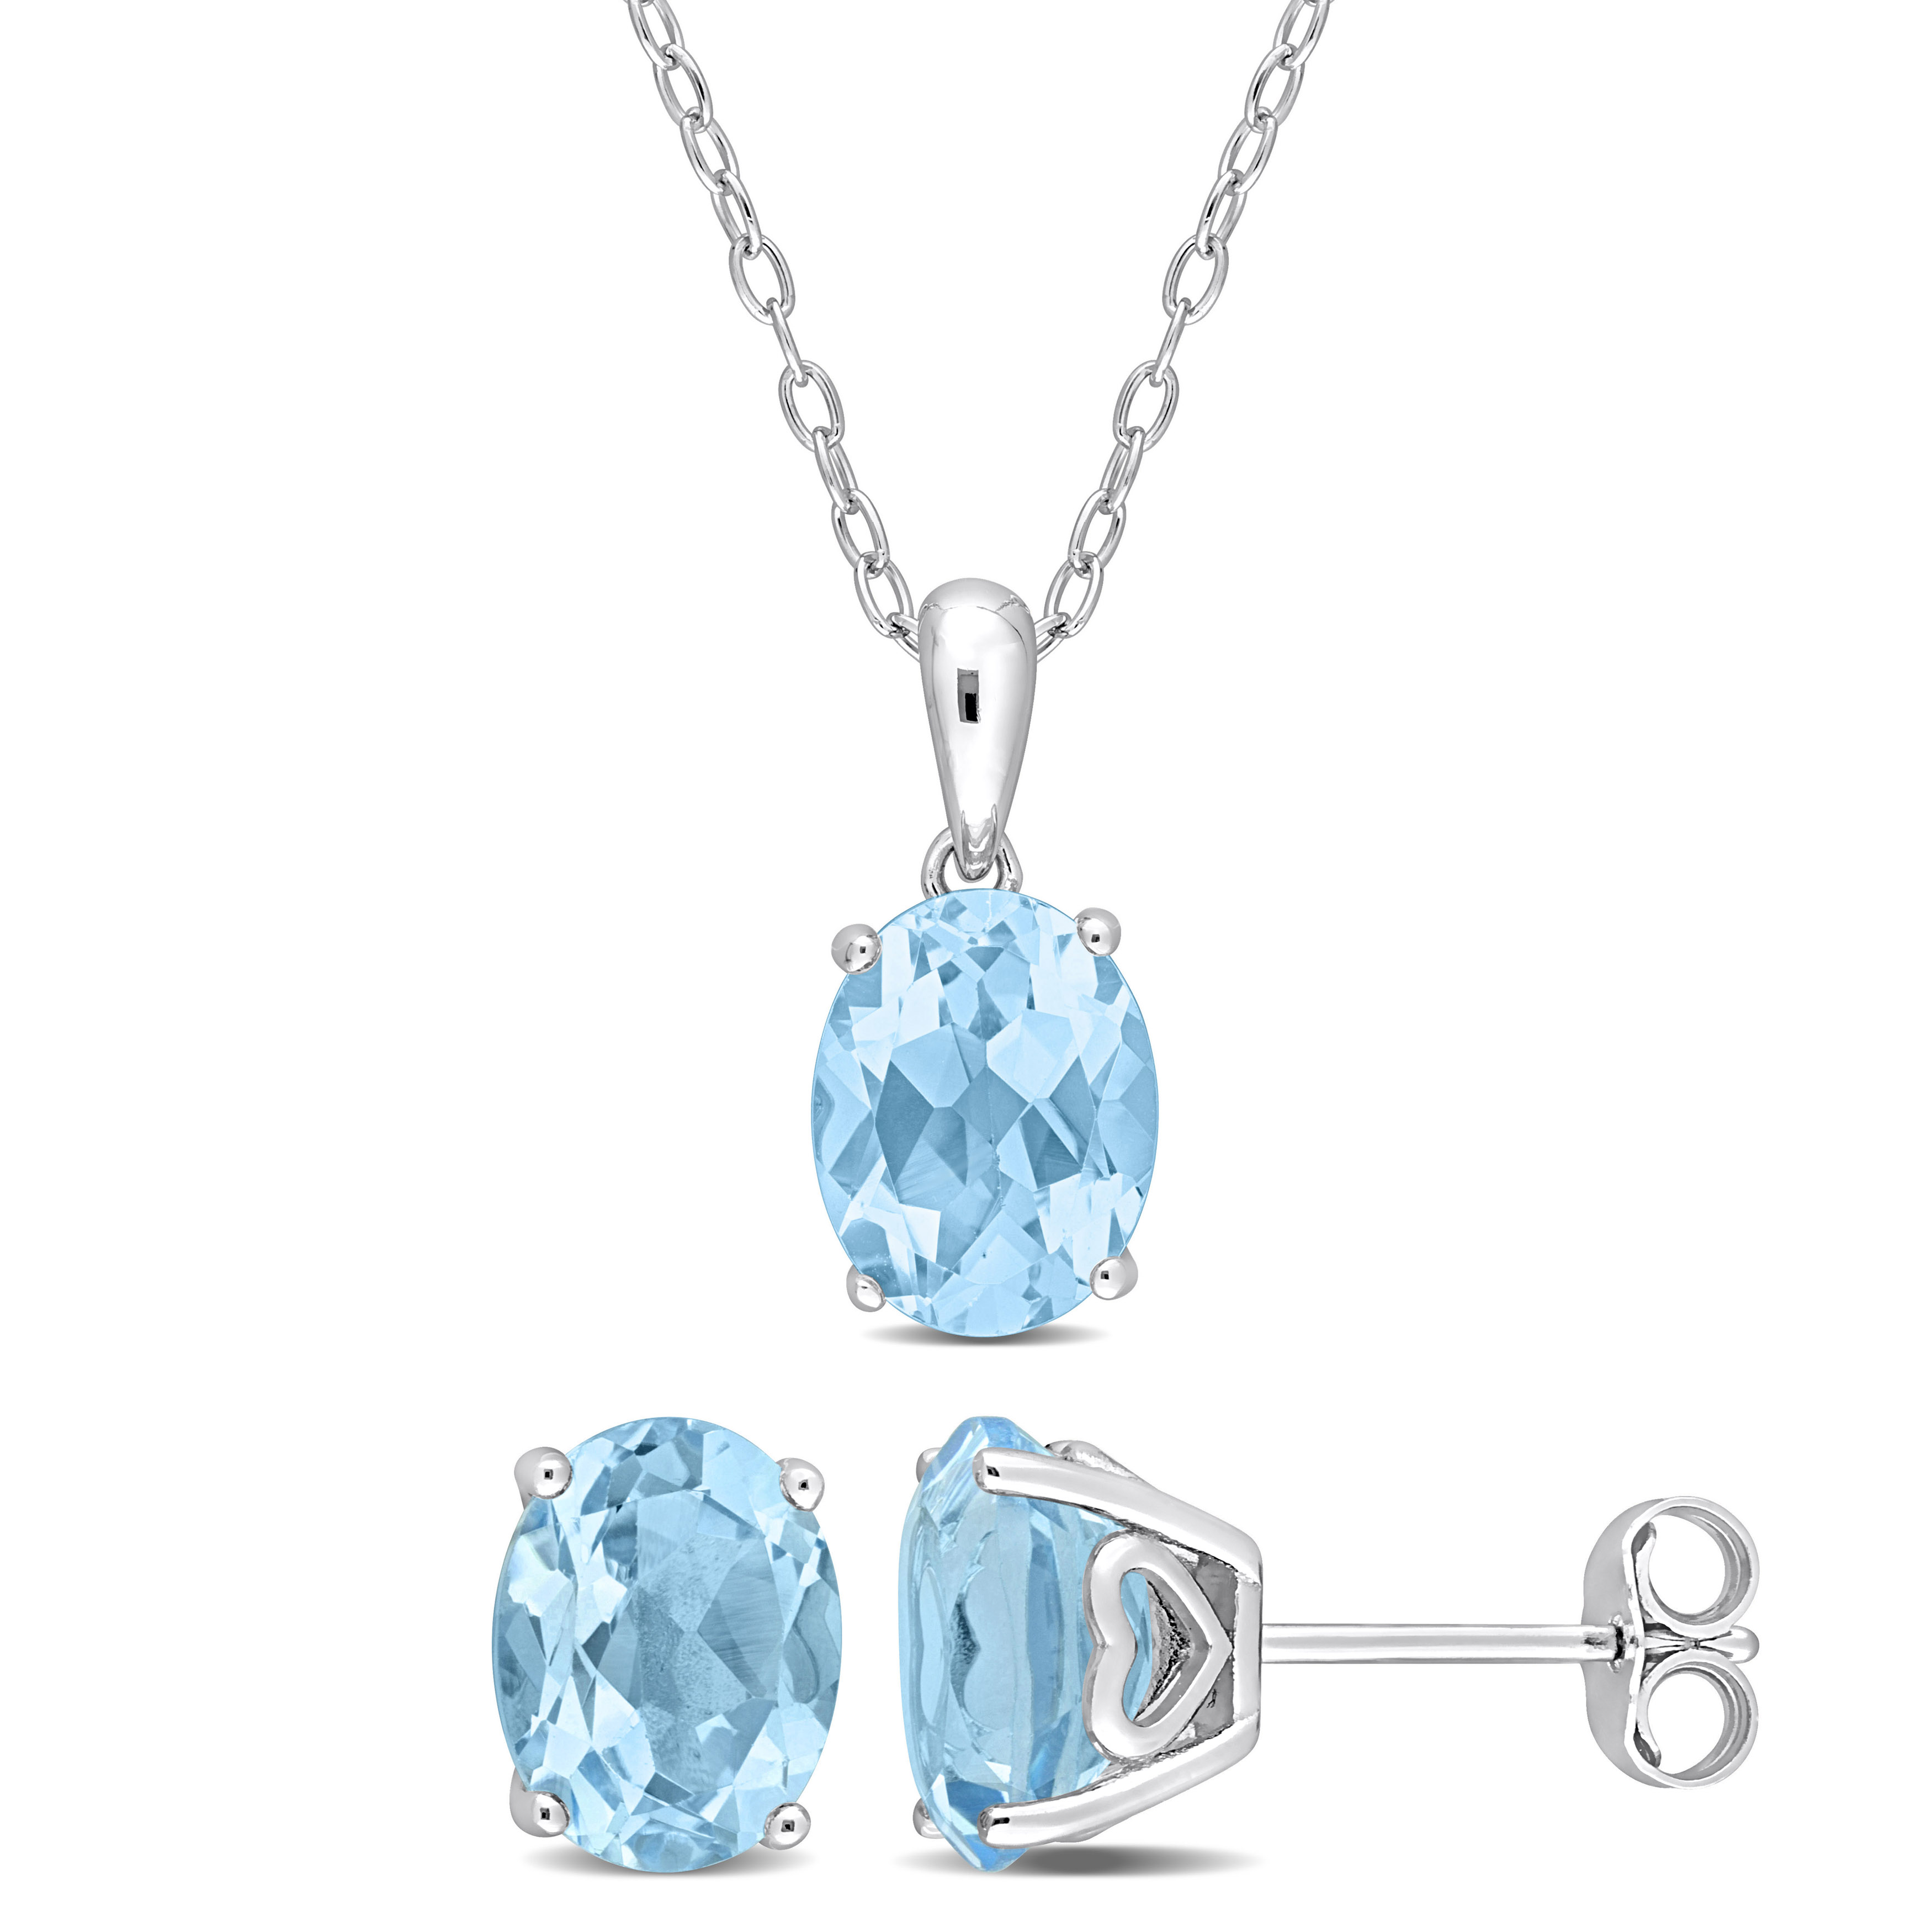 7 1/2 CT TGW Oval Sky Blue Topaz 2-Piece Solitaire Pendant with Chain and Stud Earrings Set in Sterling Silver